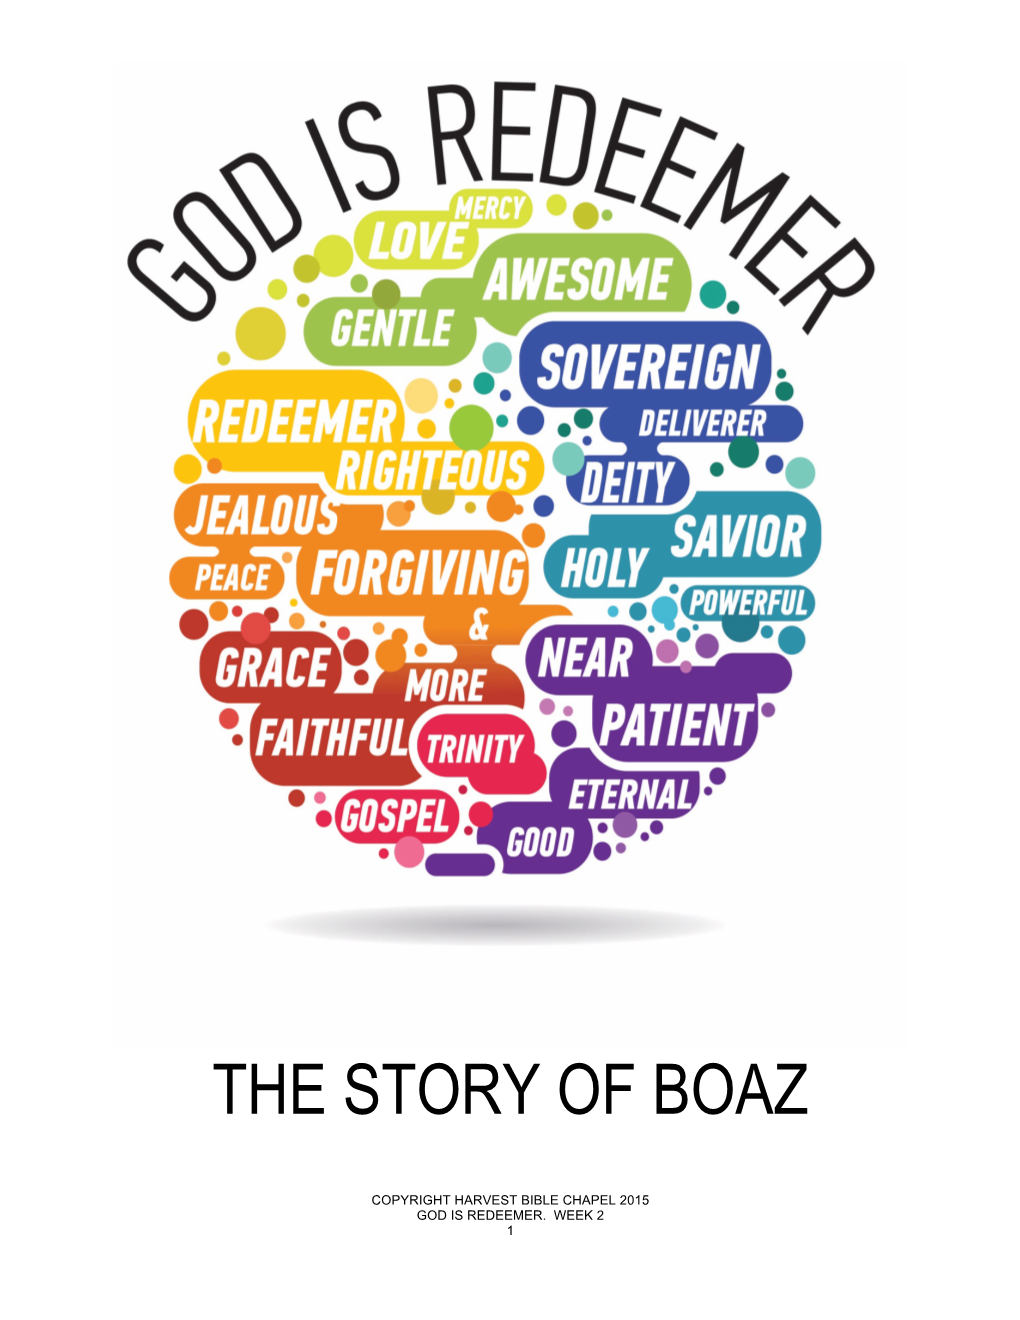 The Story of Boaz